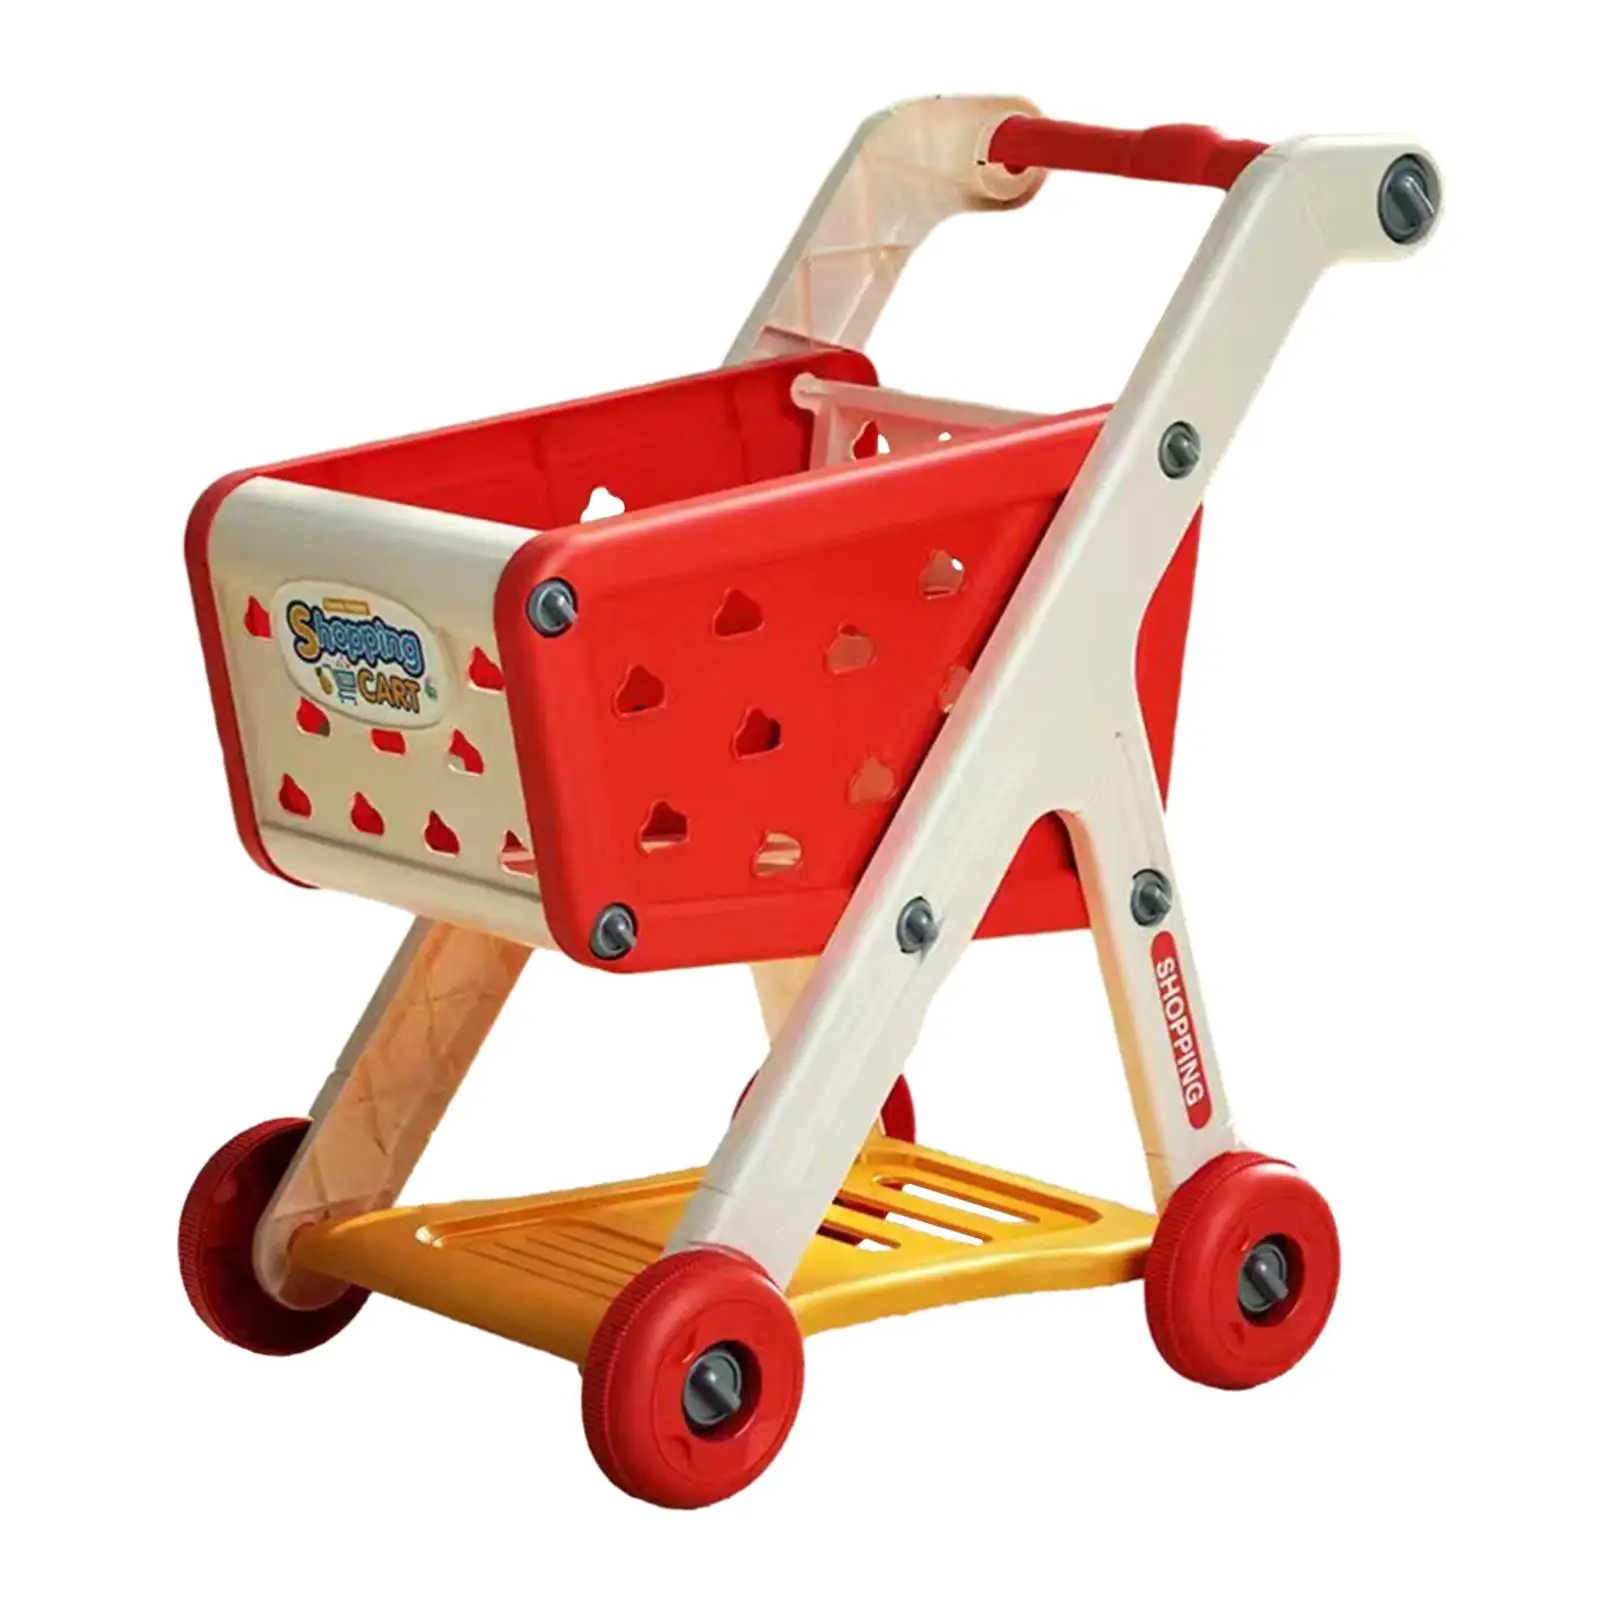 Mini Shopping Cart Toy Supermarket Handcart for Baby Preschool Party Favors